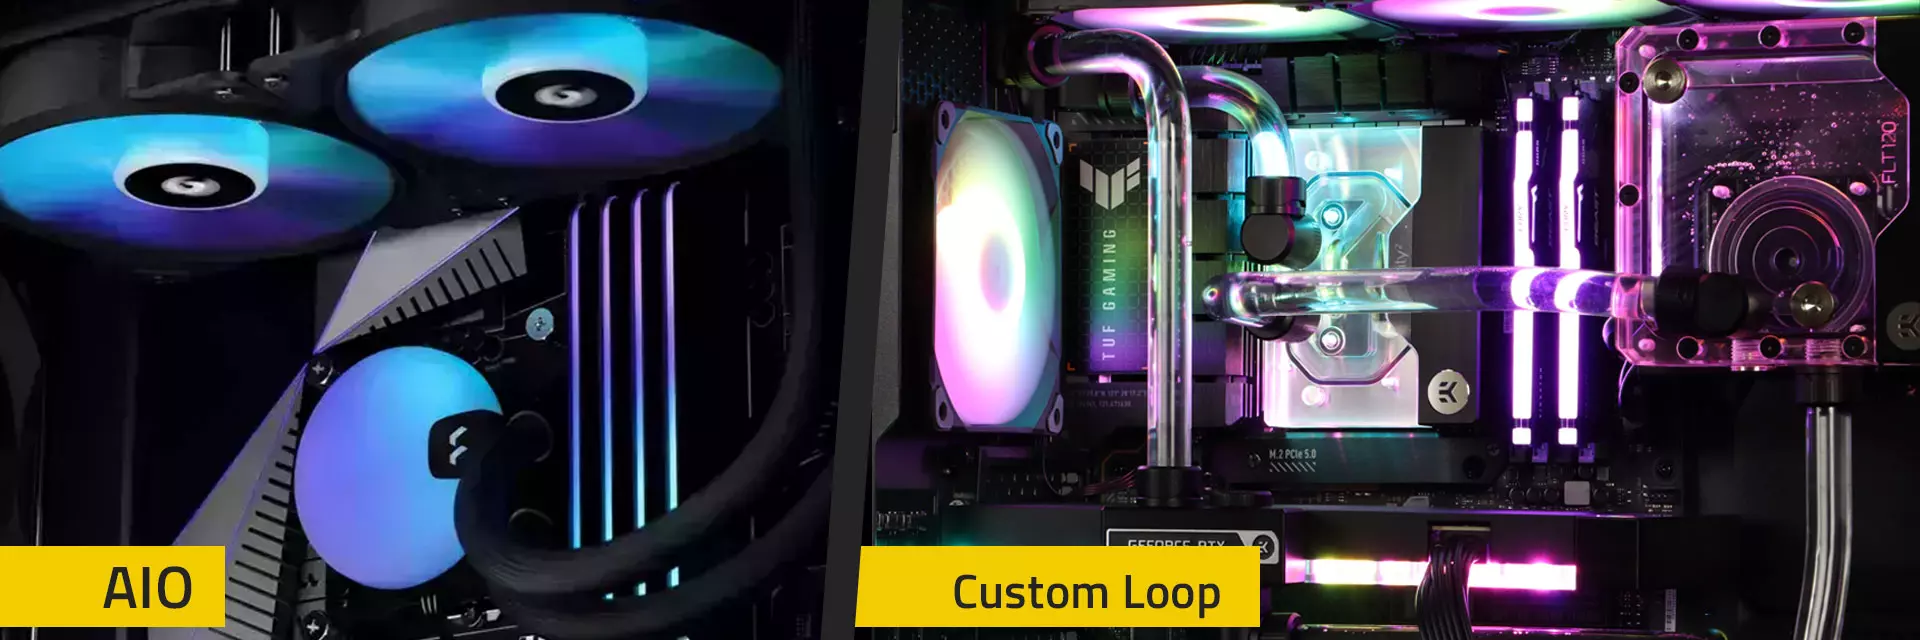 DIY Custom Water Cooling How To - here's how!